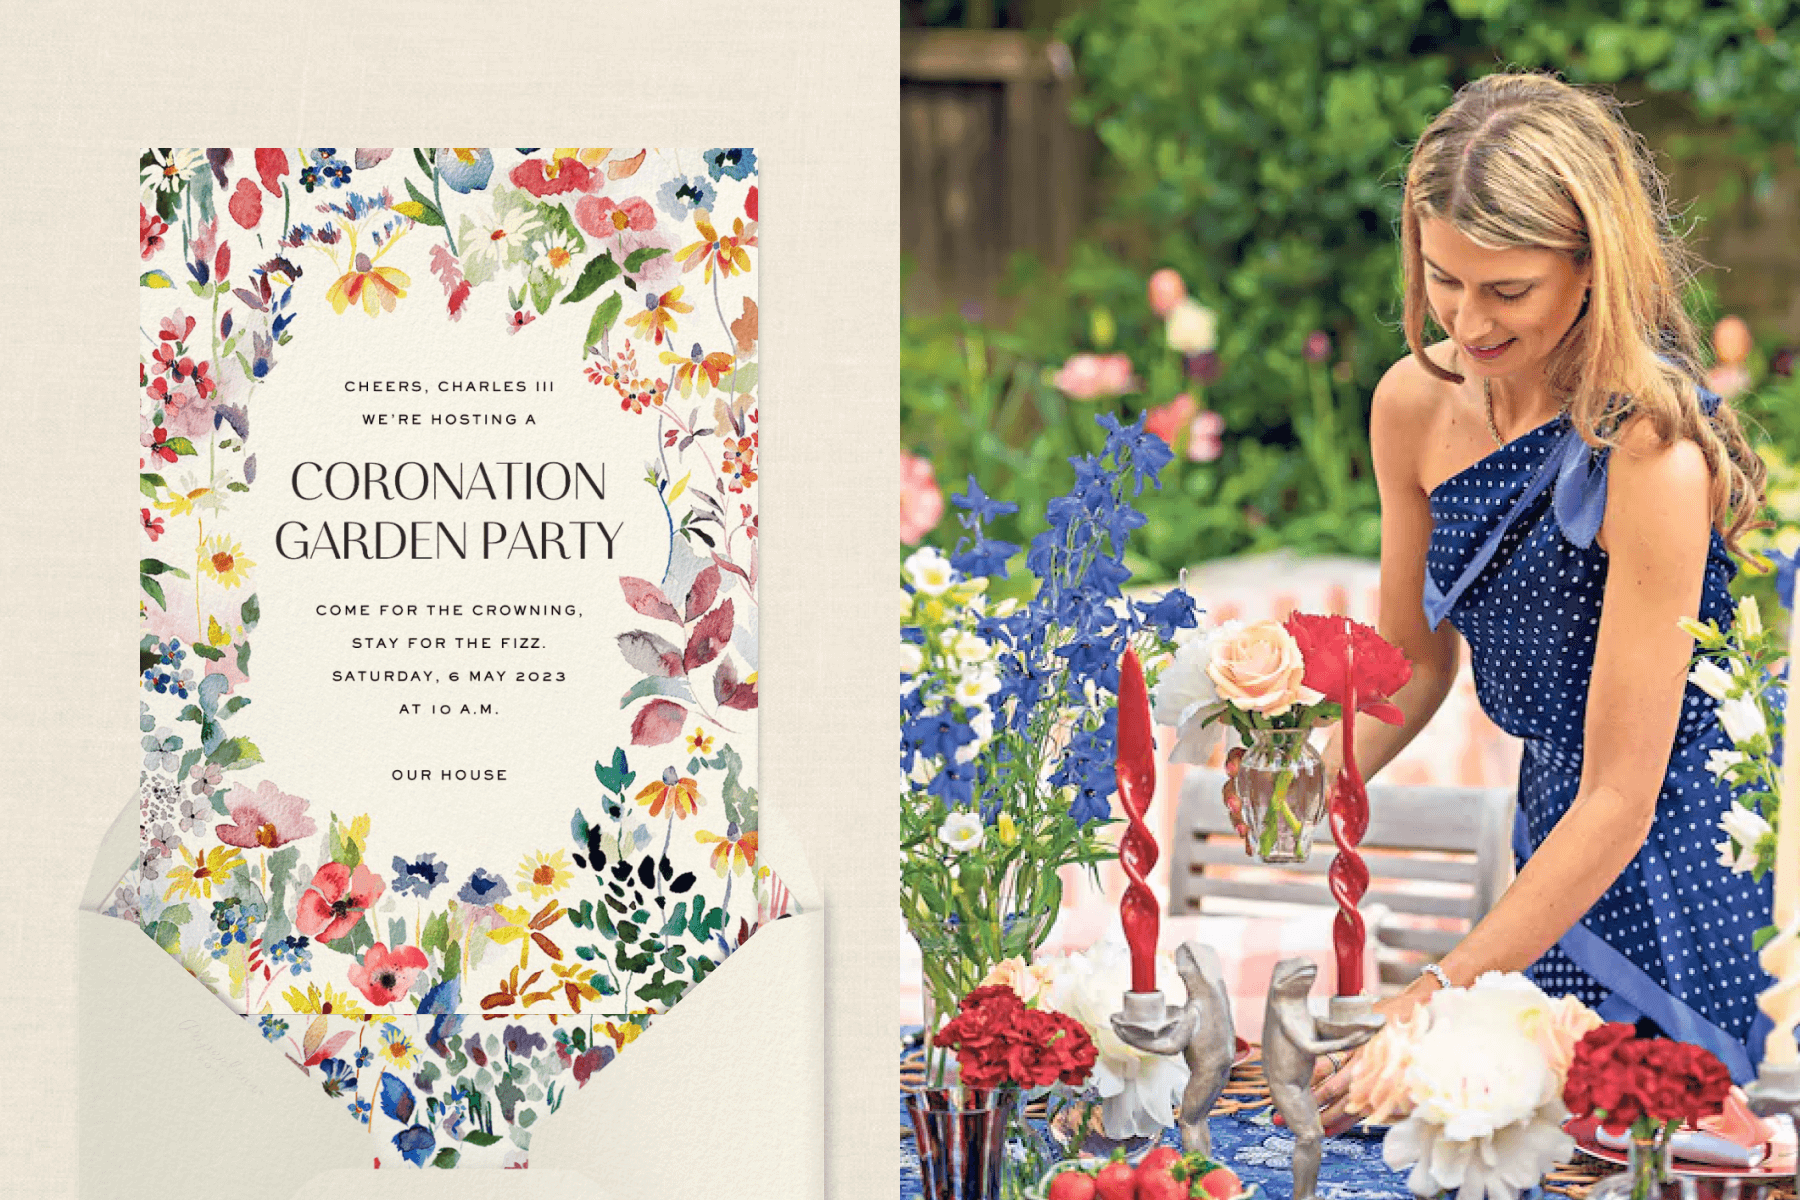 left: An invitation with lush watercolor flowers around the border. Right: A woman in a blue dress places a vase of roses on an outdoor table with lots of blue, red, and white flowers and twisted red taper candles in silver frog holders.